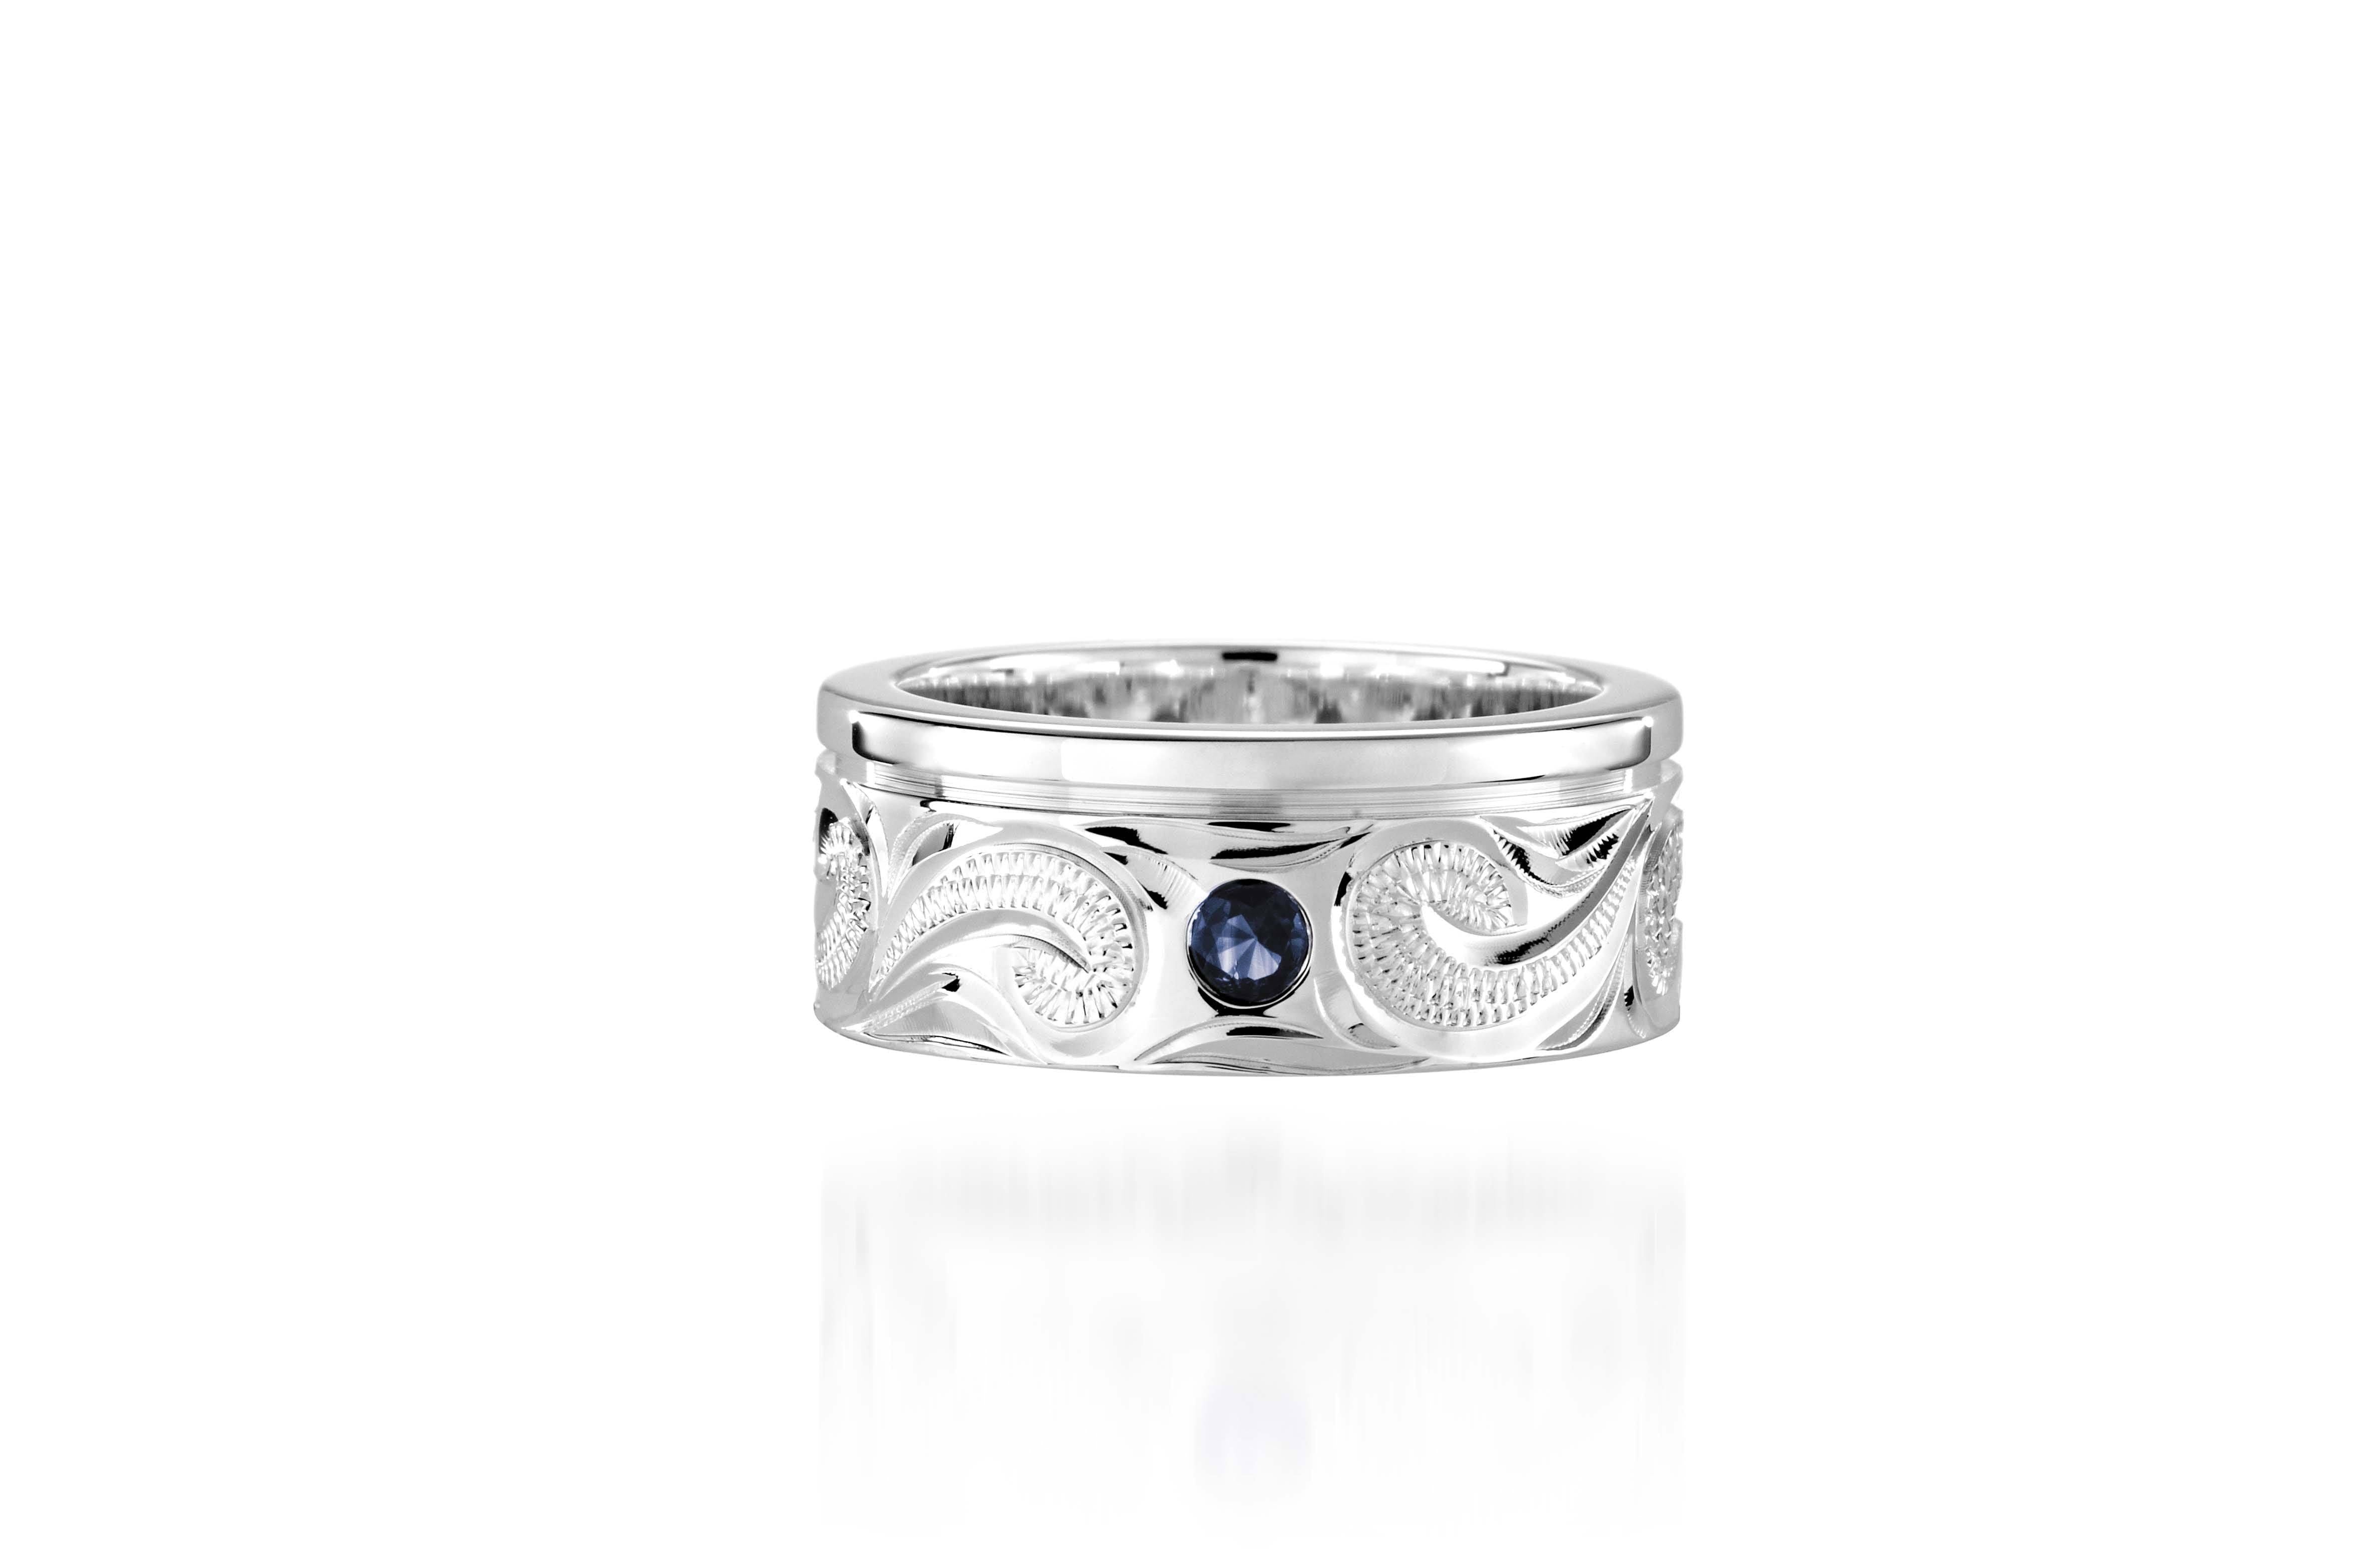 The picture shows a 925 sterling silver ring with scroll hand-engravings and sapphire.